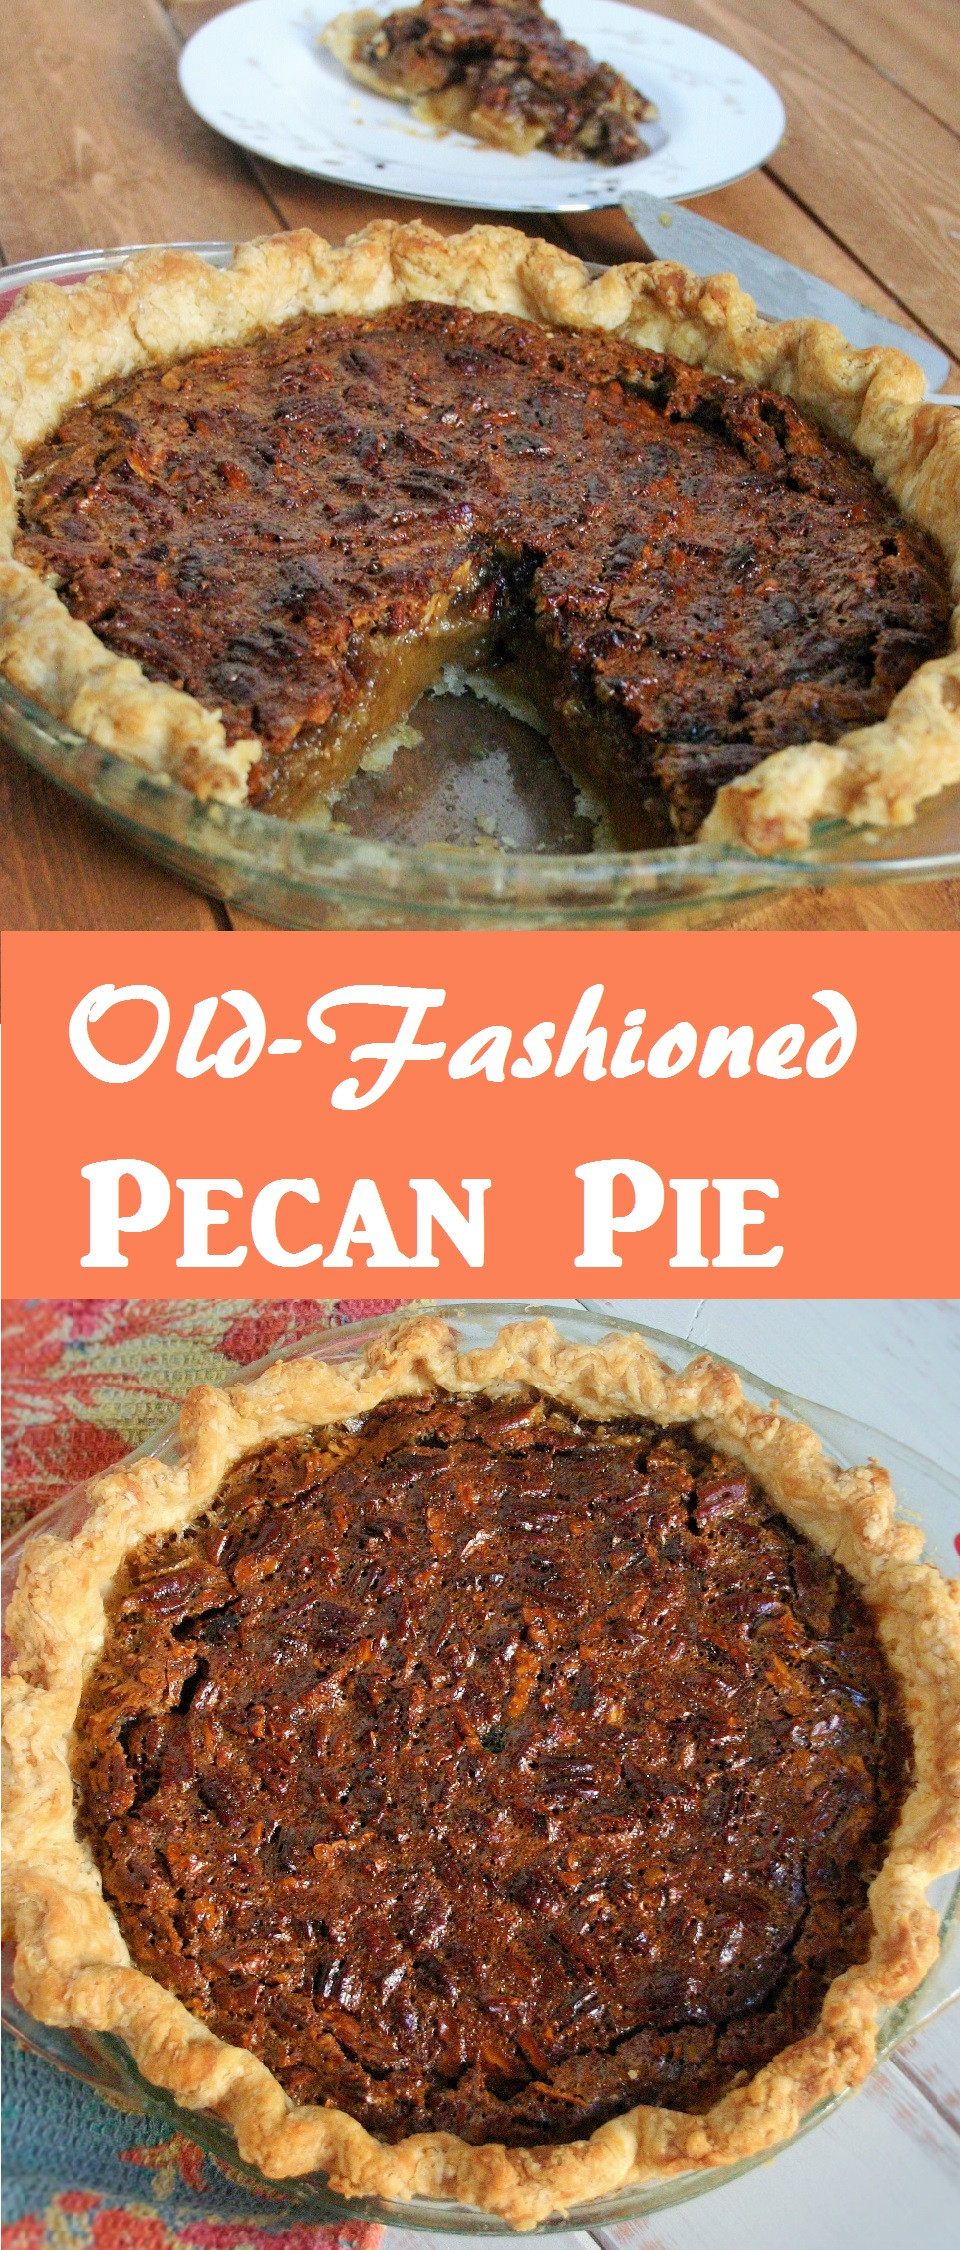 Old Fashioned Pecan Pie Recipe
 Old Fashioned Pecan Pie Ready to Yumble